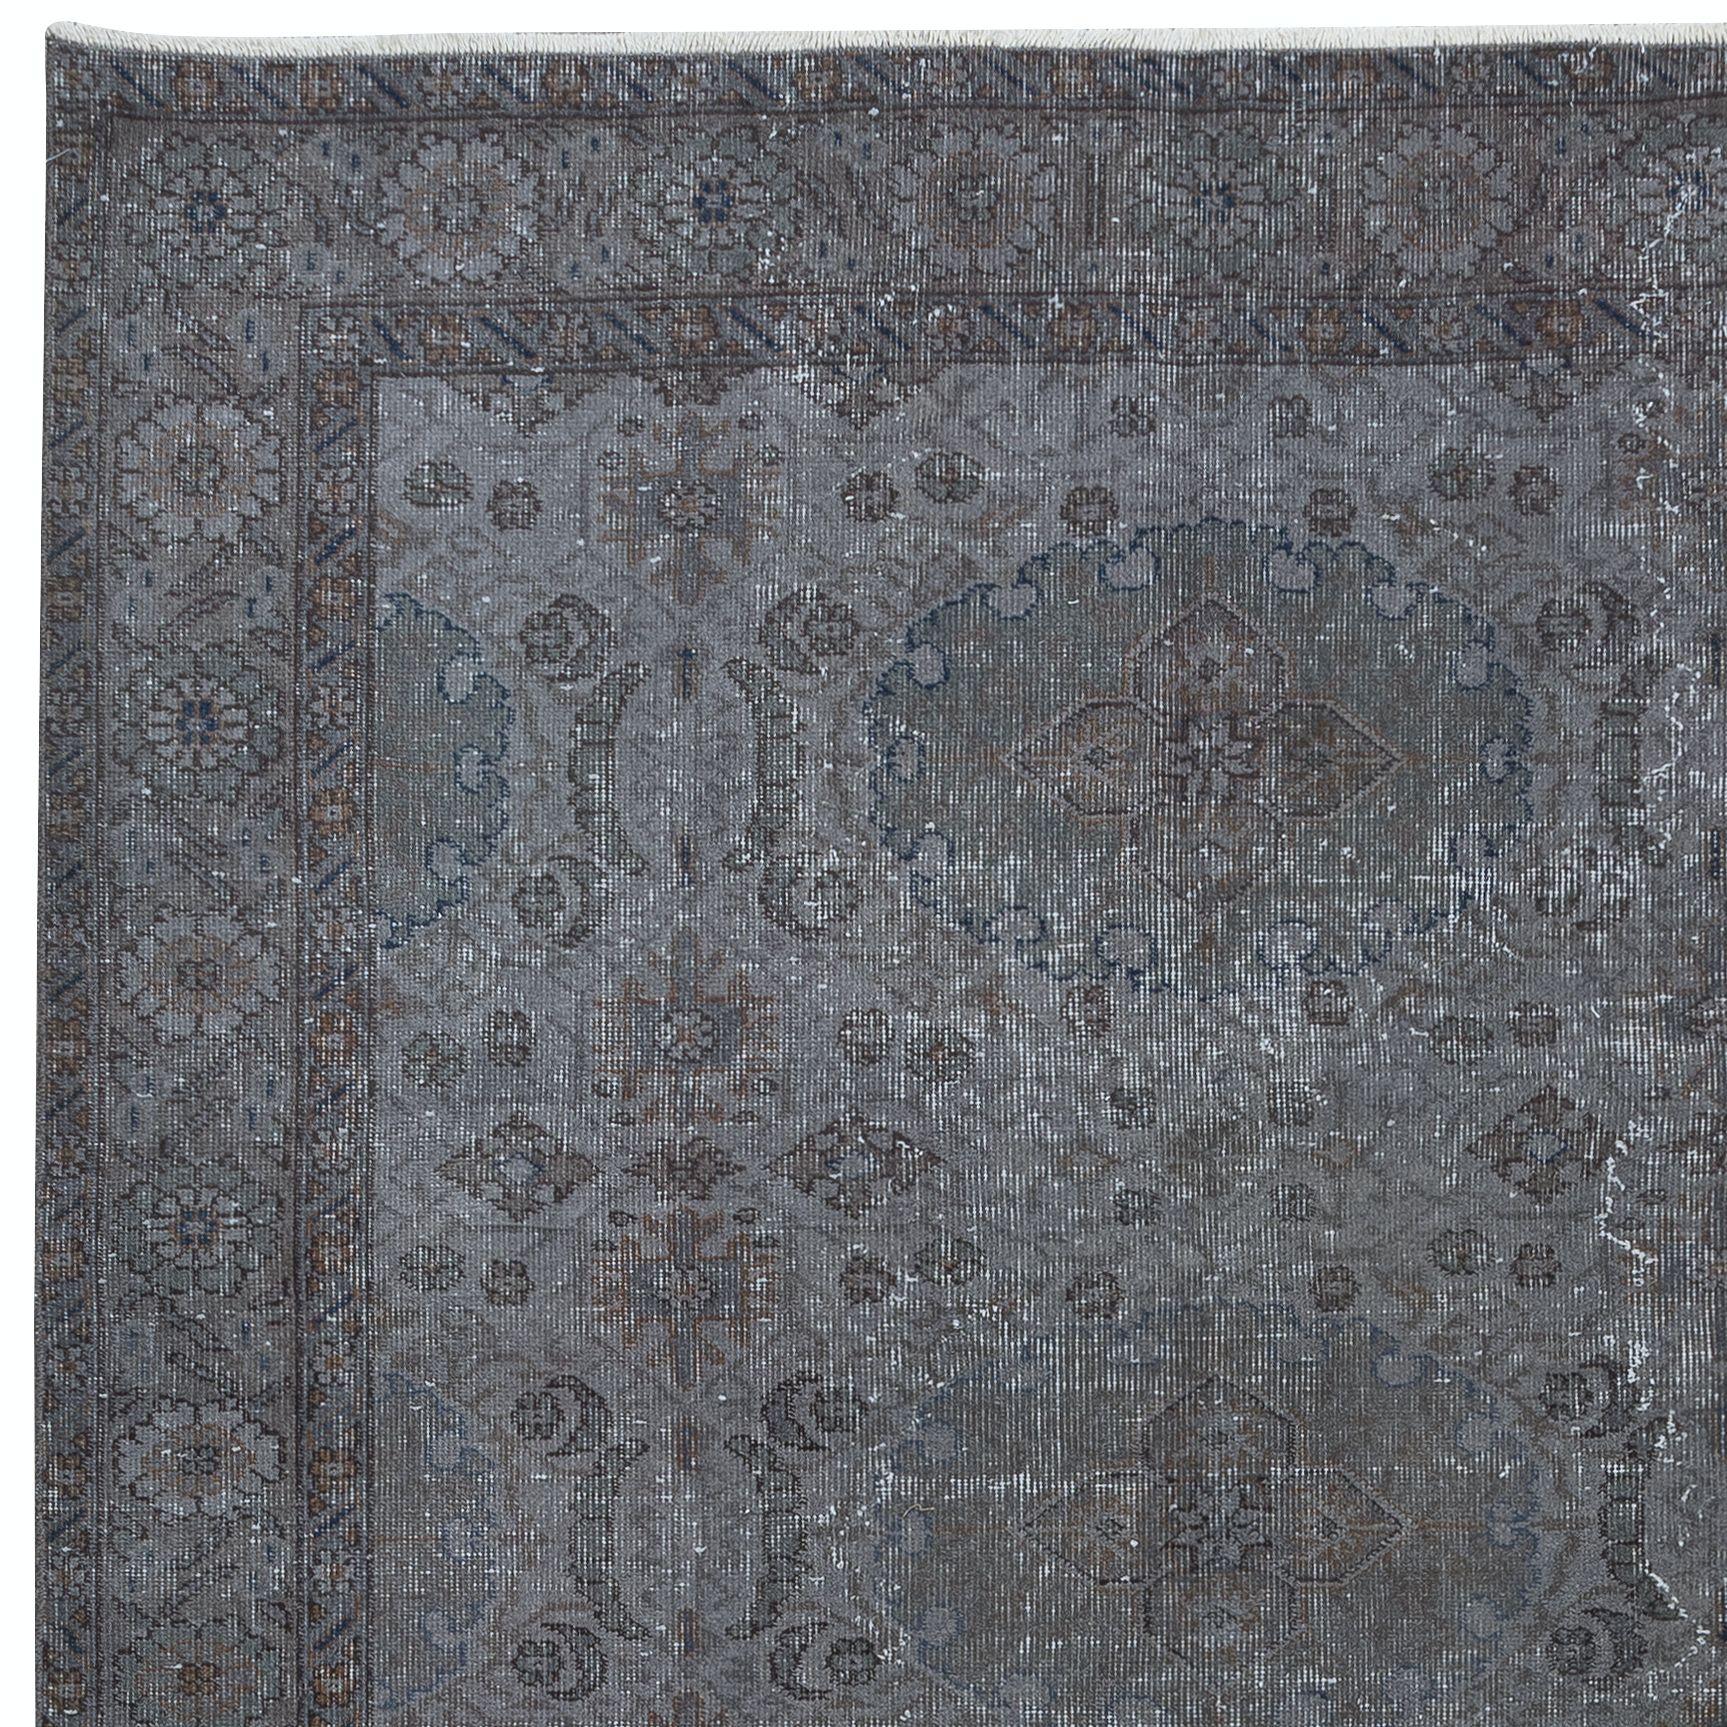 Hand-Woven 5.6x8.7 Ft Traditional Handmade Rug in Iron Gray Color, Modern Home Decor Carpet For Sale